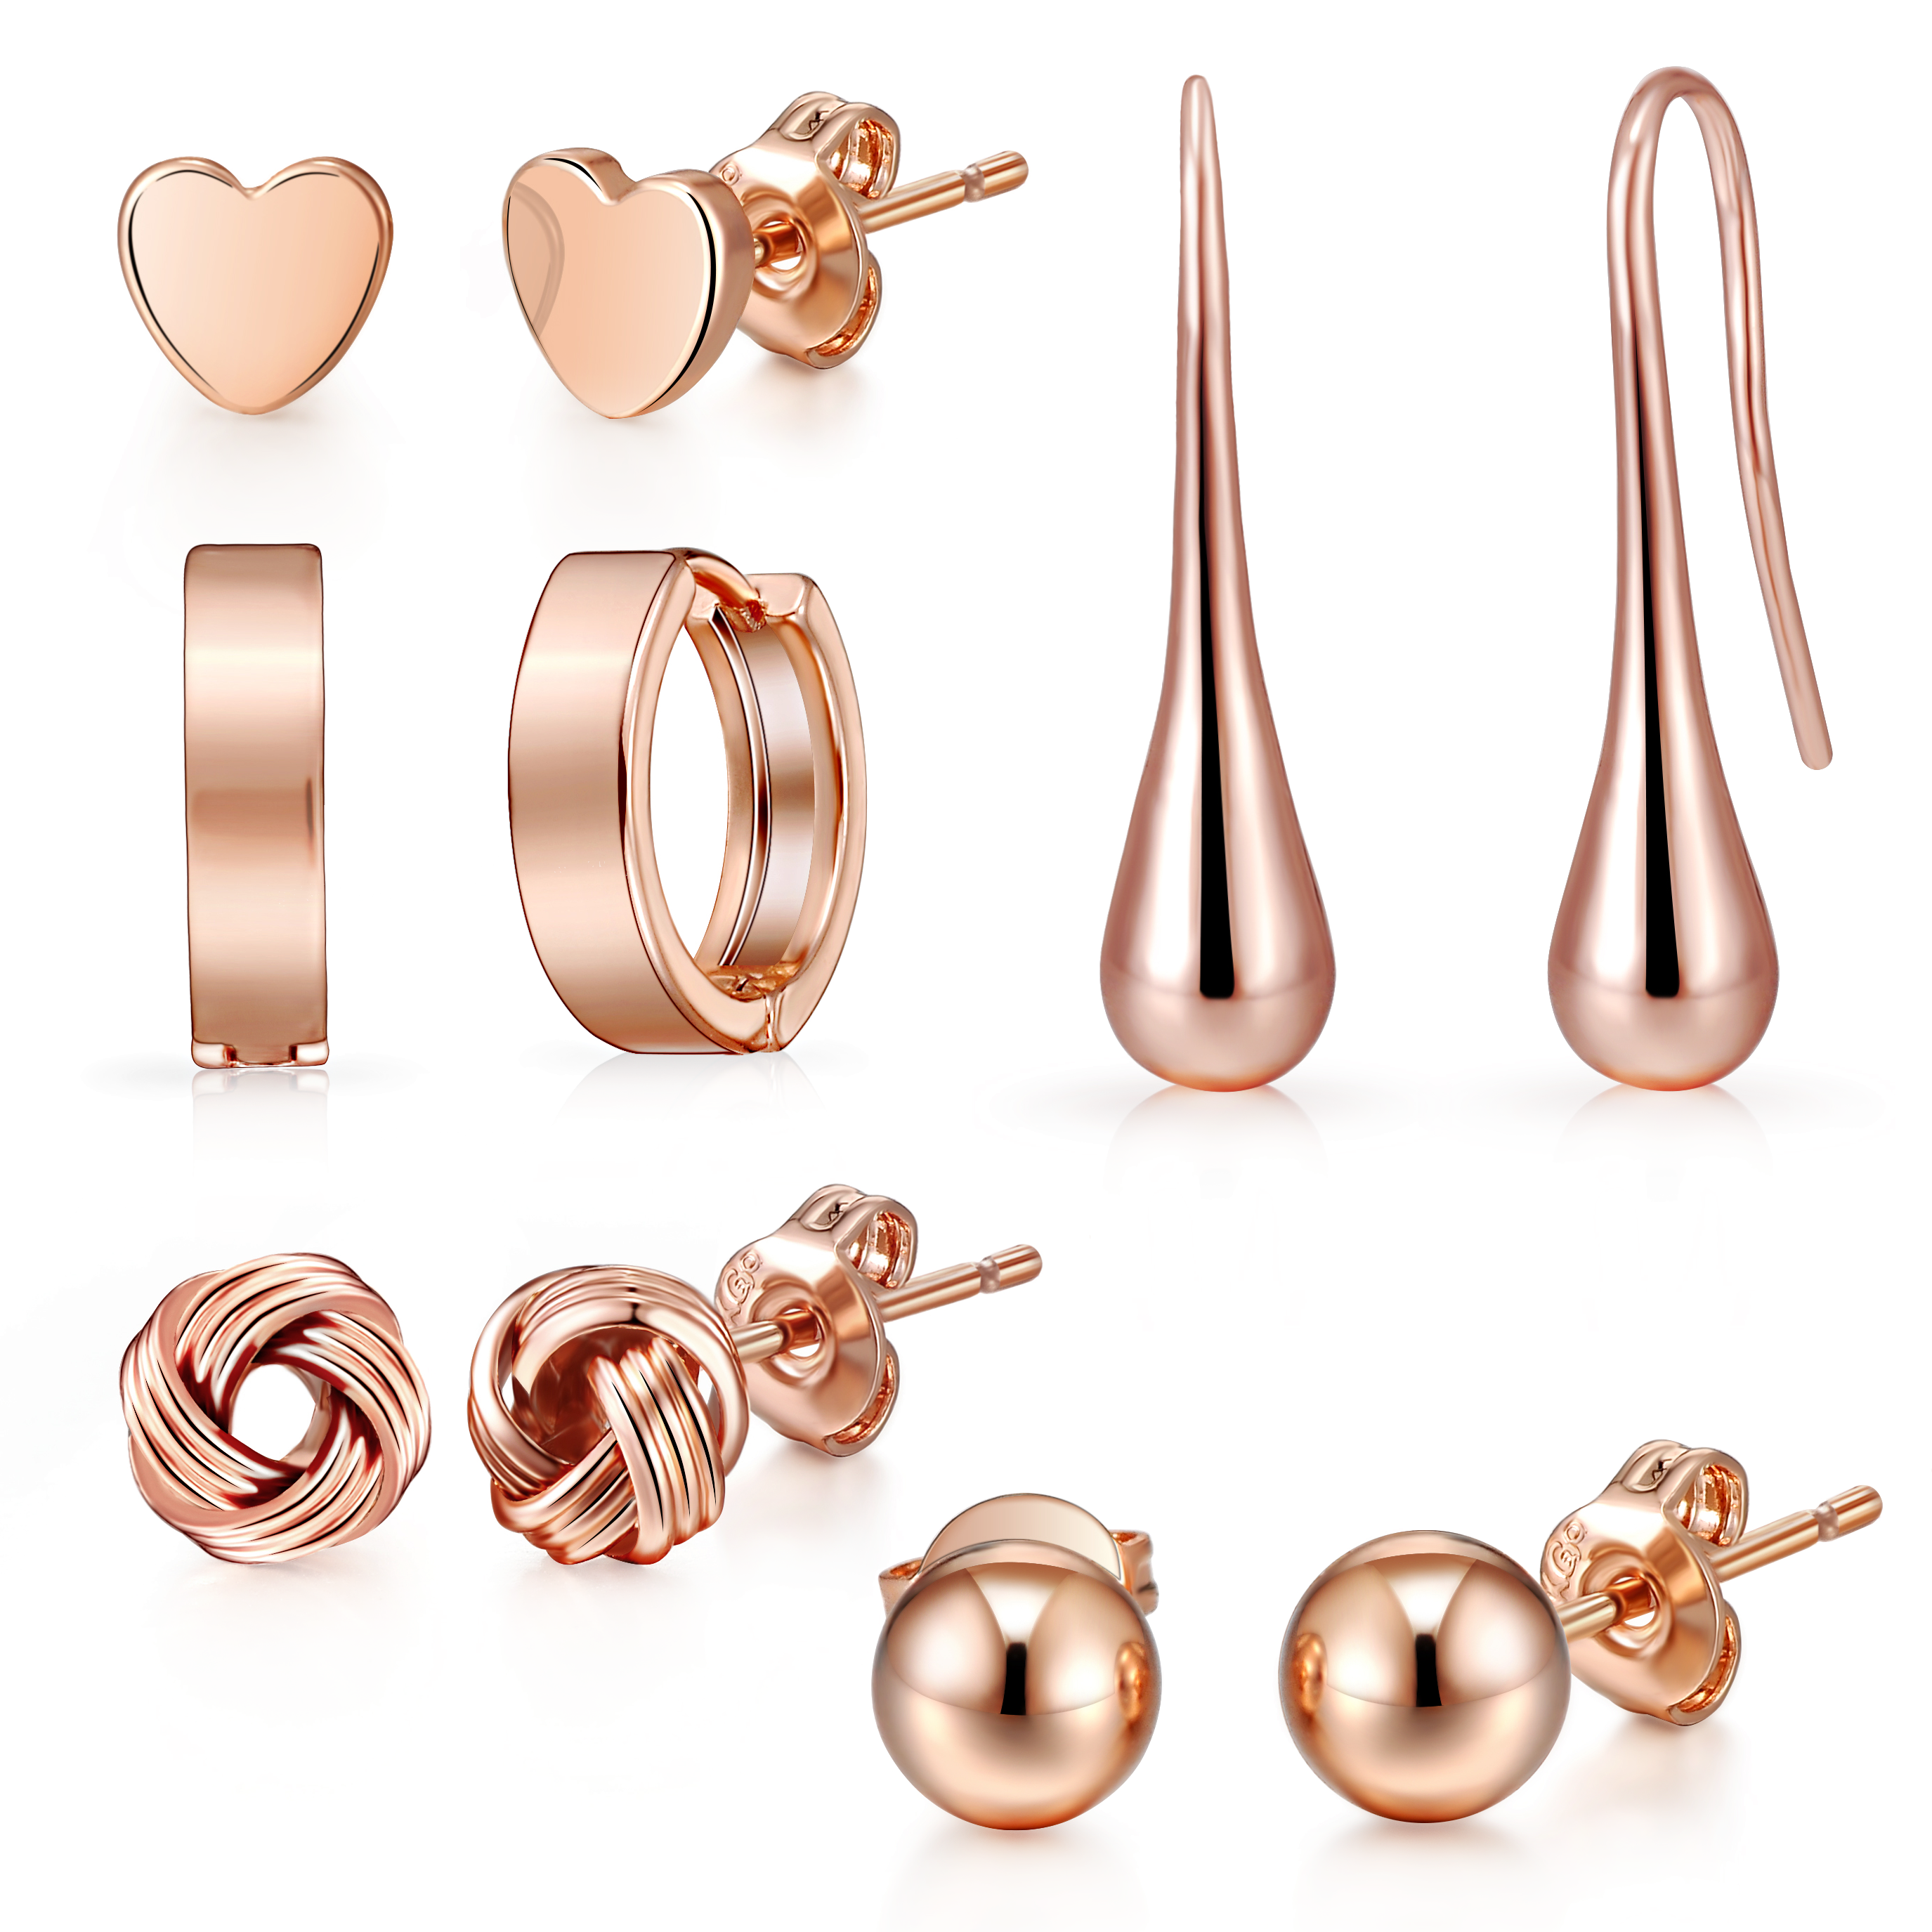 5 Pairs of Rose Gold Plated Earrings